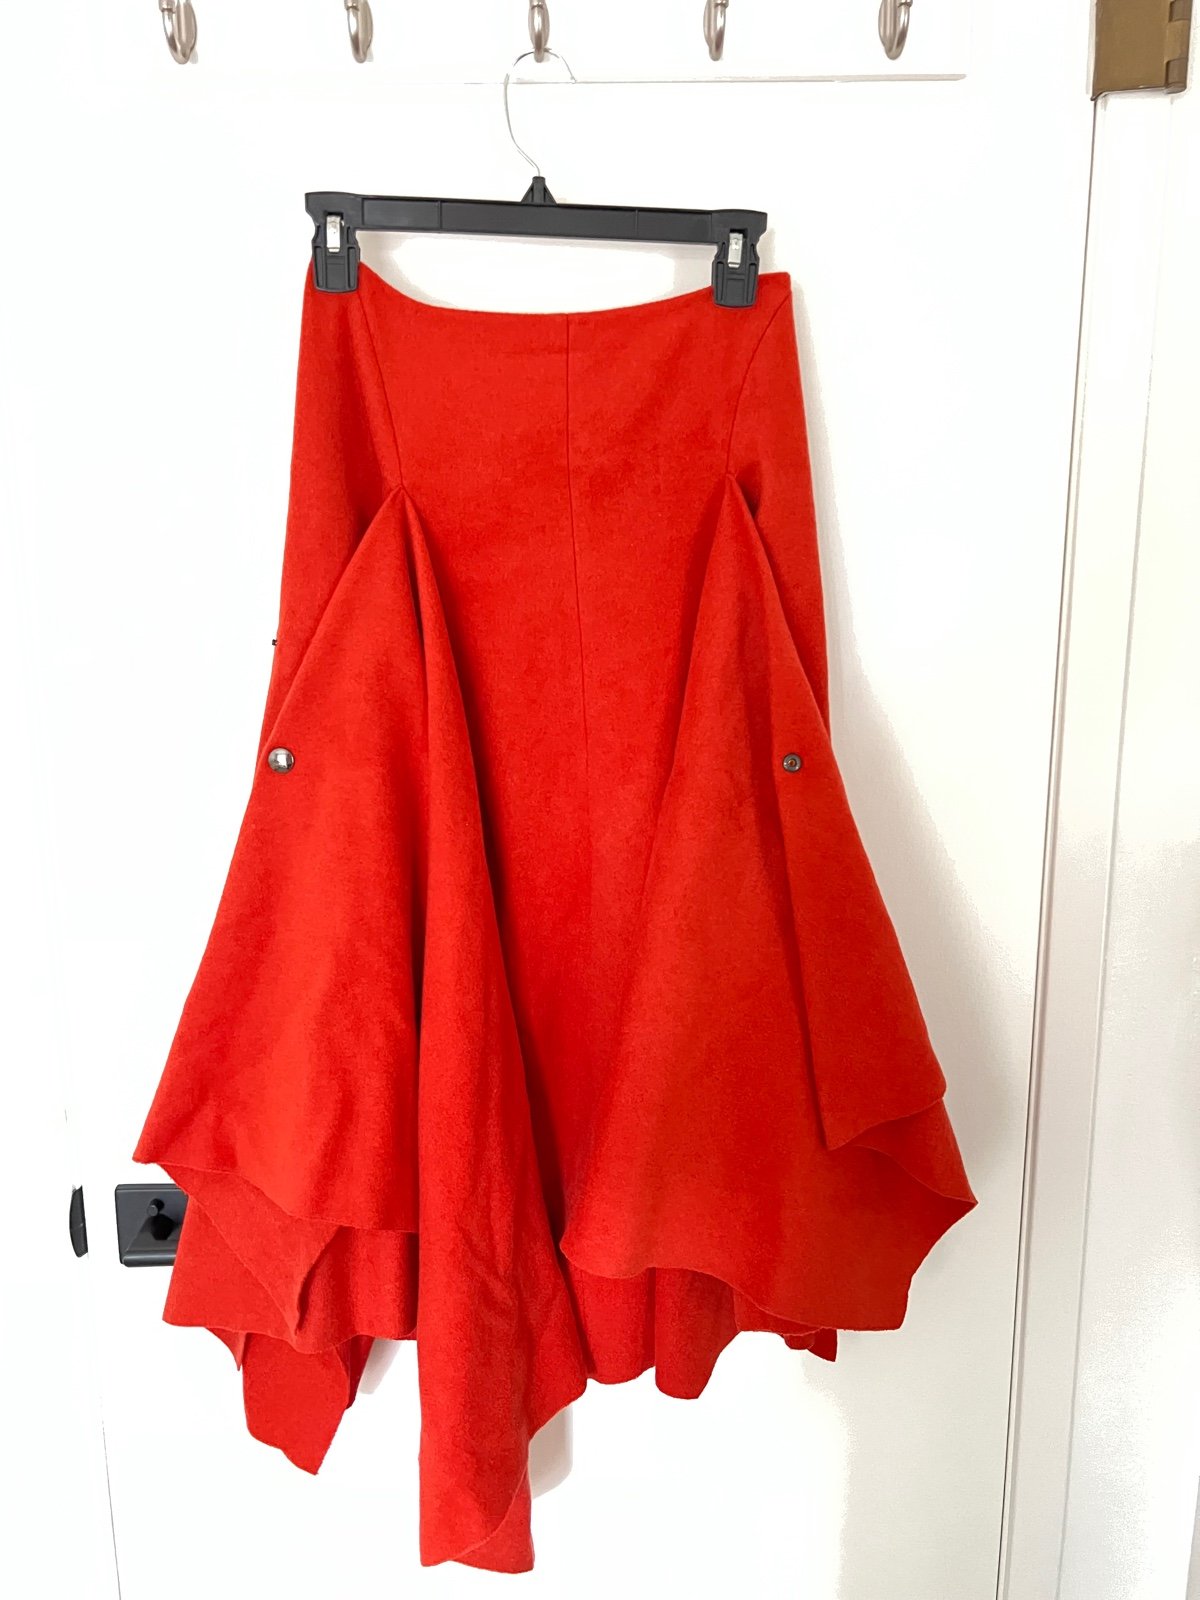 Special offer  Sportmax flared wool skirt lqqcE6xNs Everyday Low Prices